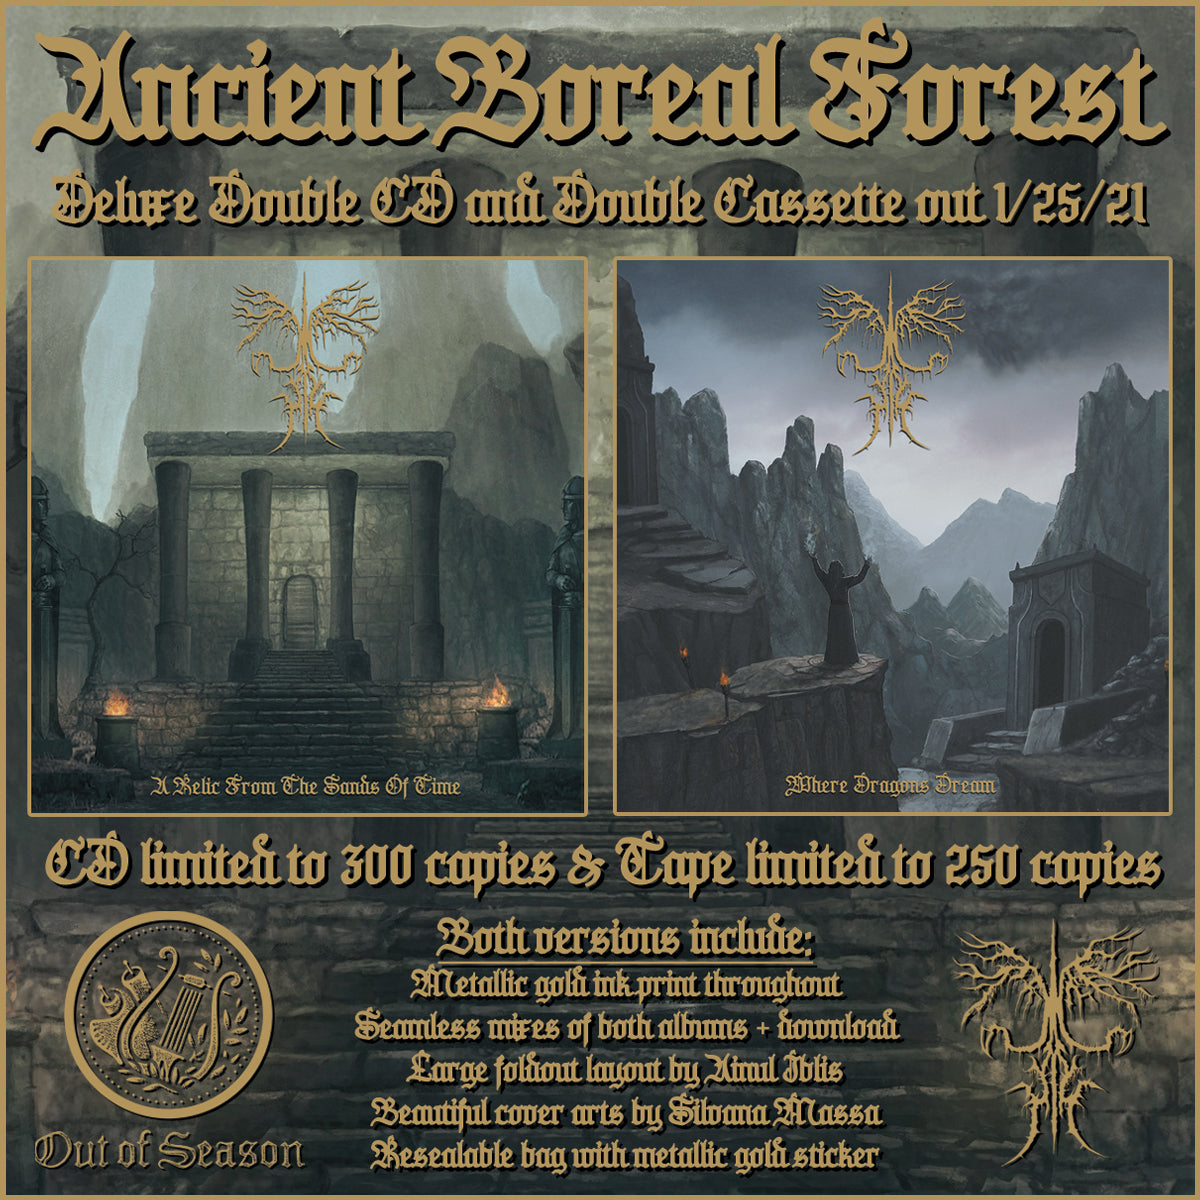 ANCIENT BOREAL FOREST double CD/double tape advertisement